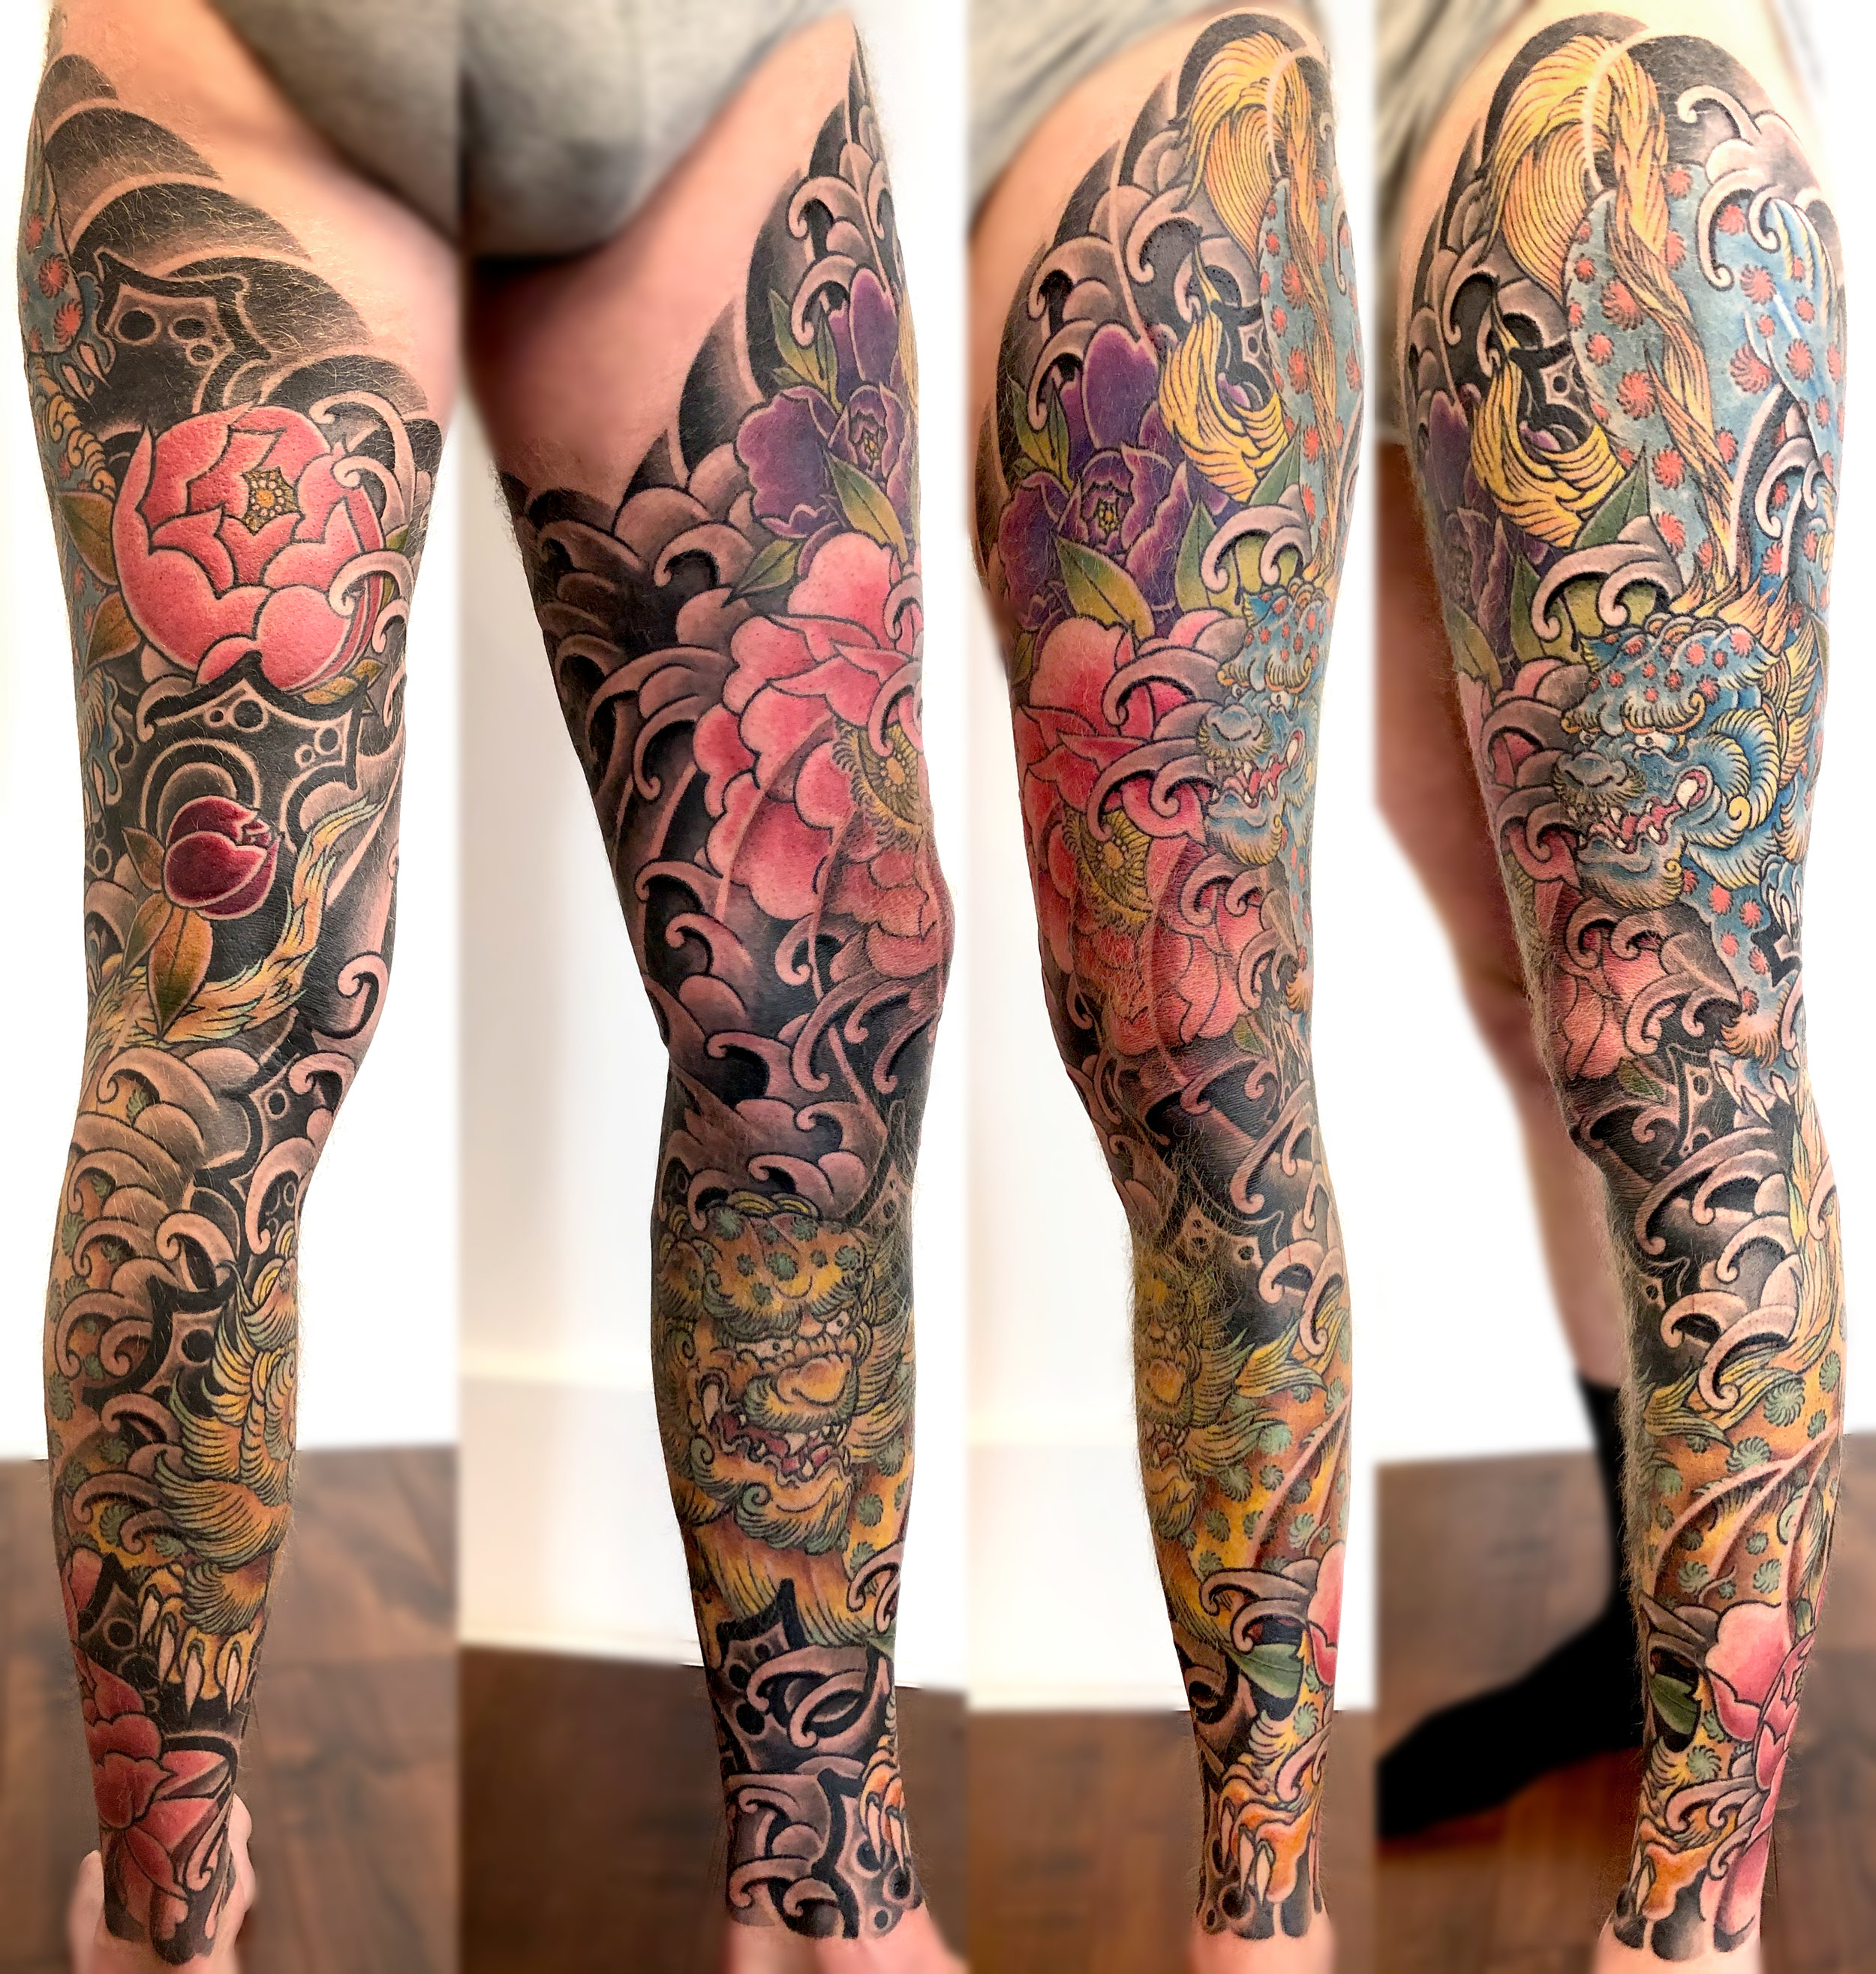 Leg sleeve lion tattoo designs for guys click now. 